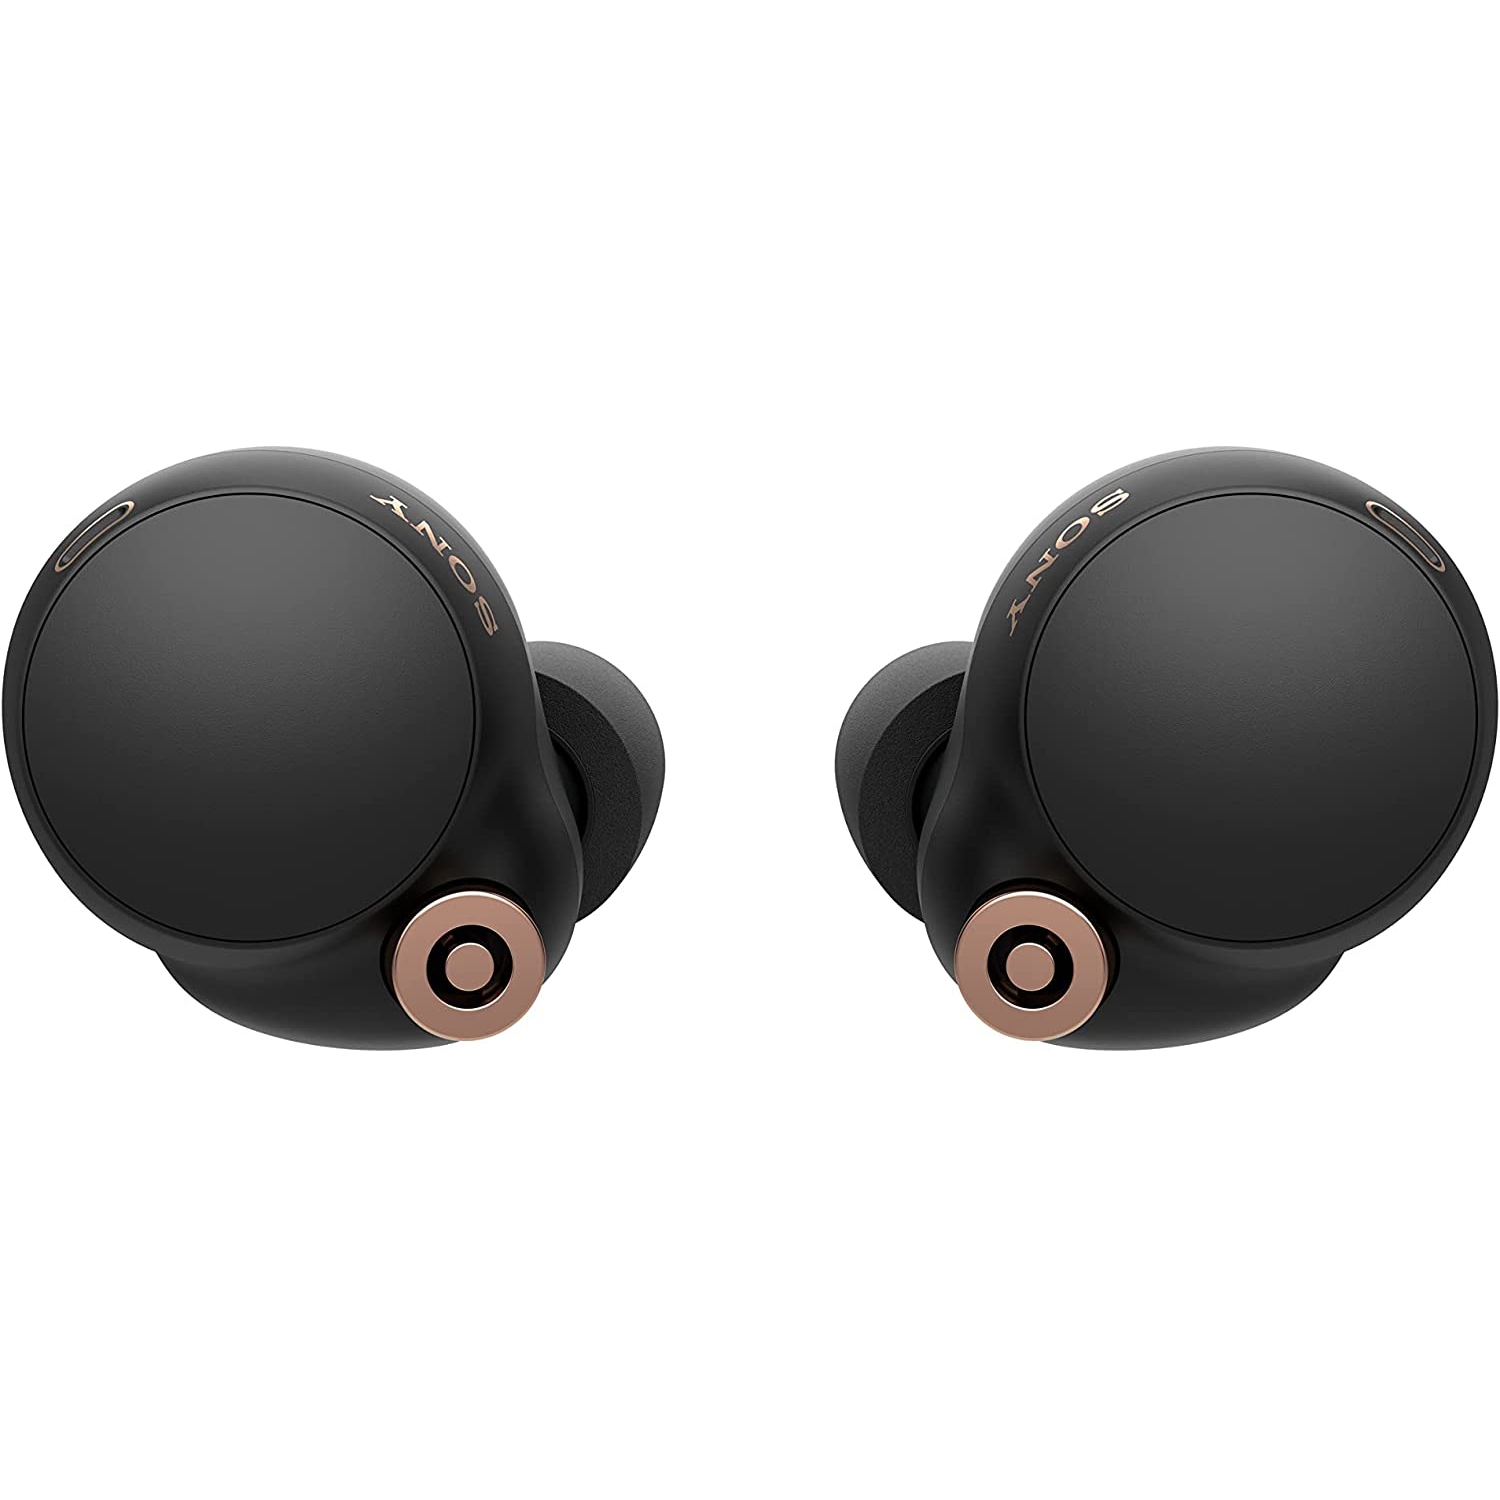 Refurbished (Excellent) - Sony WF-1000XM4 Industry Leading Noise Canceling Truly Wireless Earbud - Black